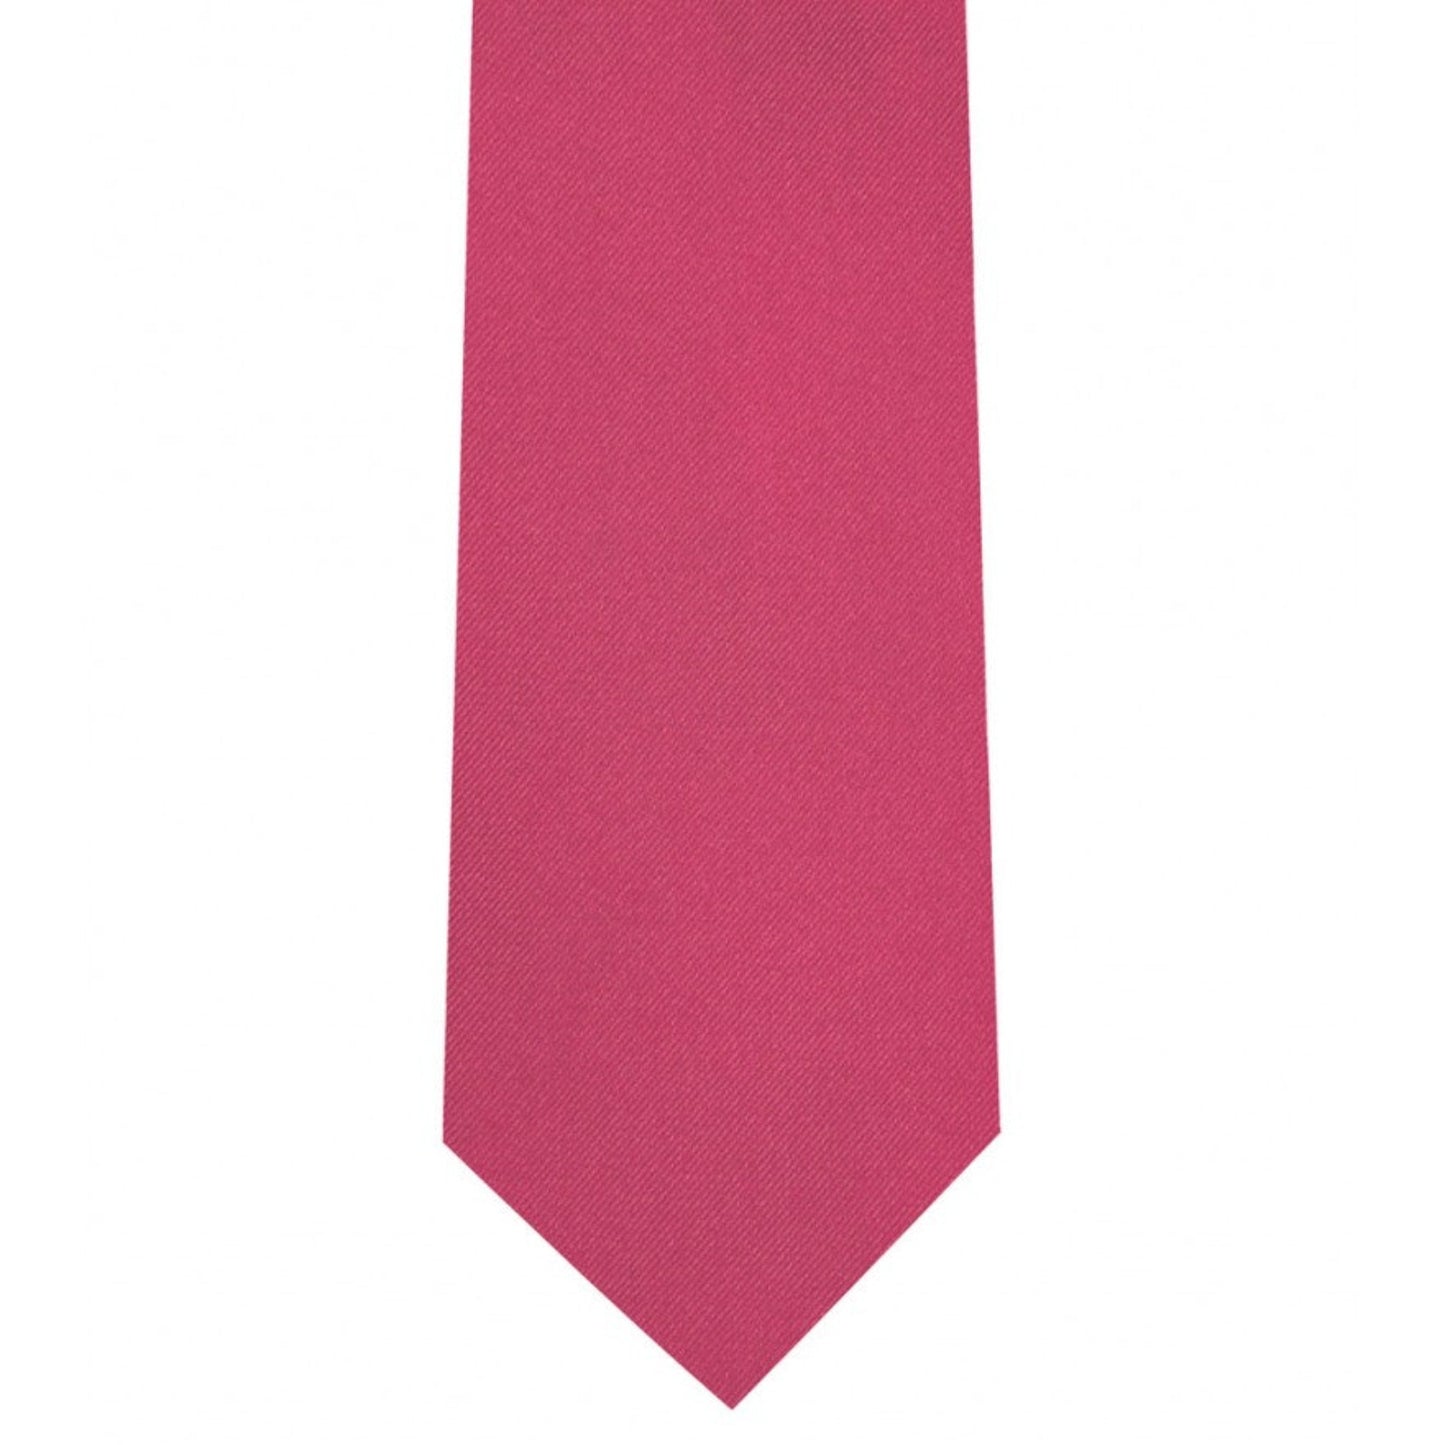 Classic French Rose Tie Ultra Skinny tie width 2.25 inches With Matching Pocket Square | KCT Menswear